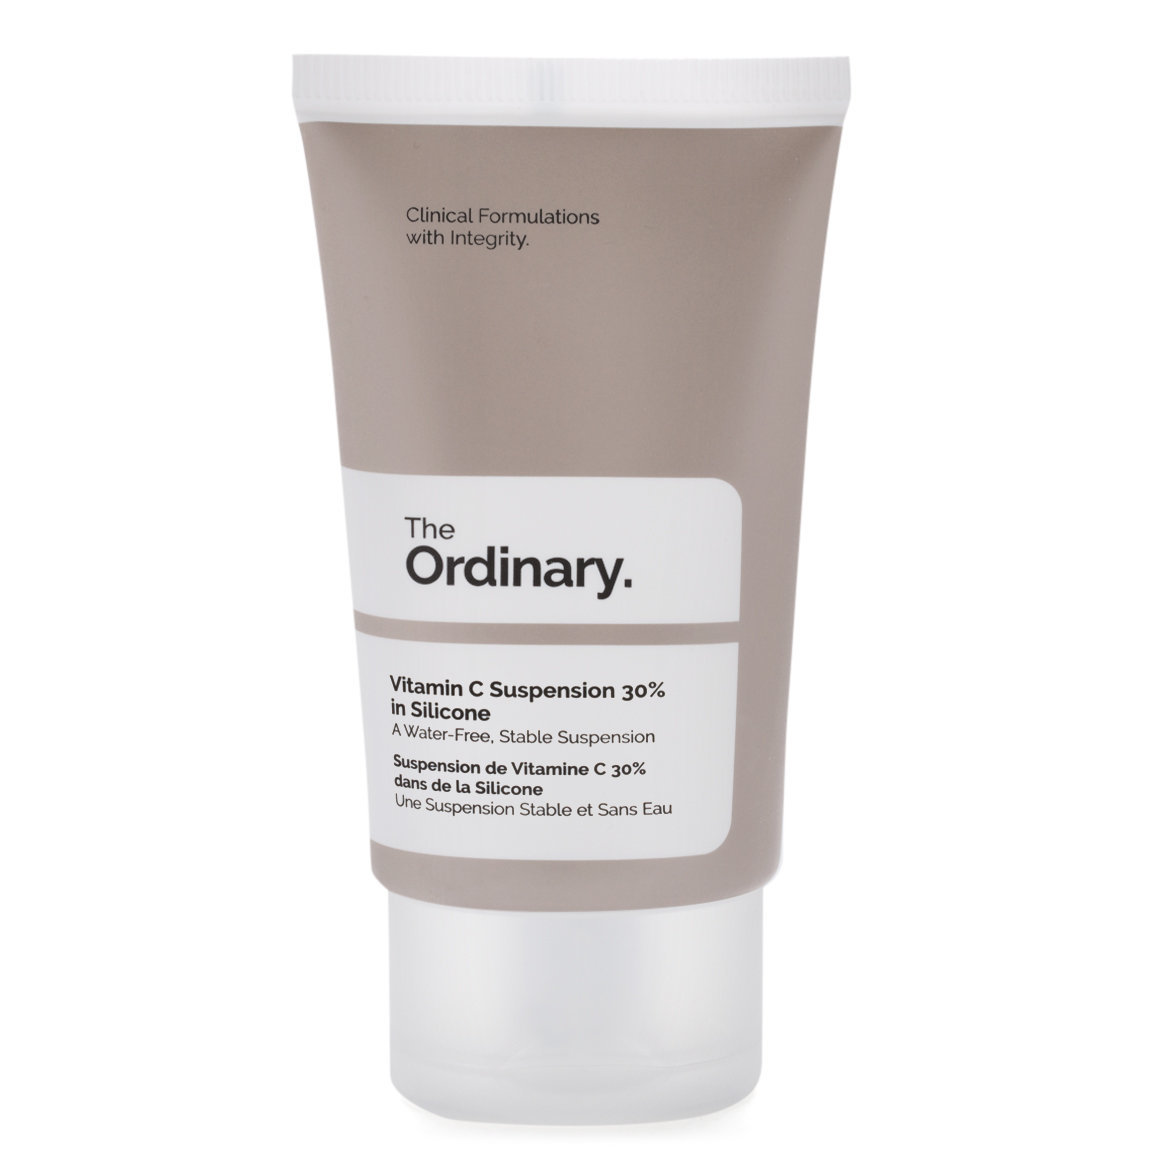 The Ordinary. Vitamin C Suspension 30% In Silicone alternative view 1 - product swatch.